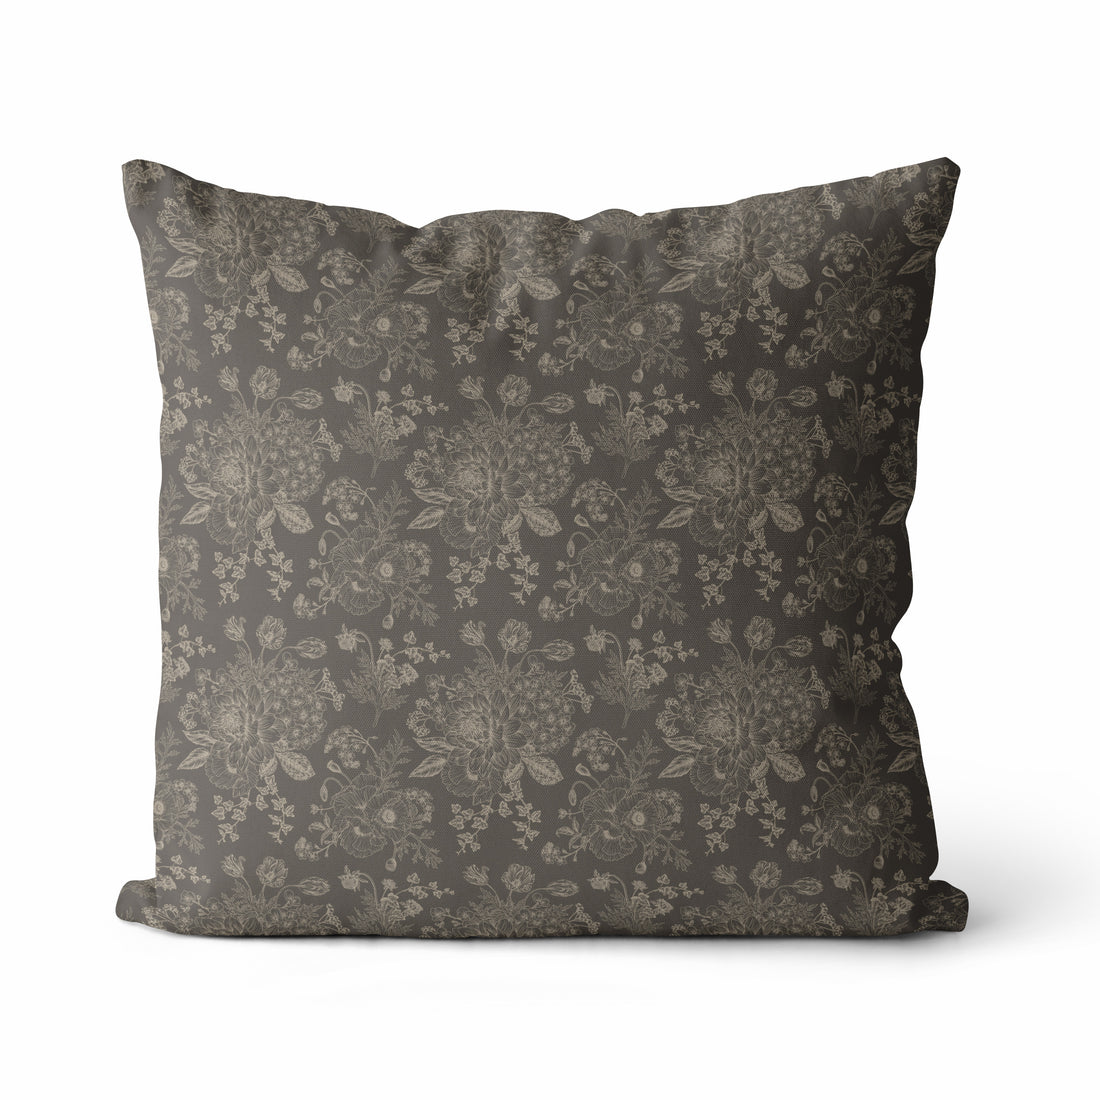 Gray Beige Floral Luxe Pillow Cover IV